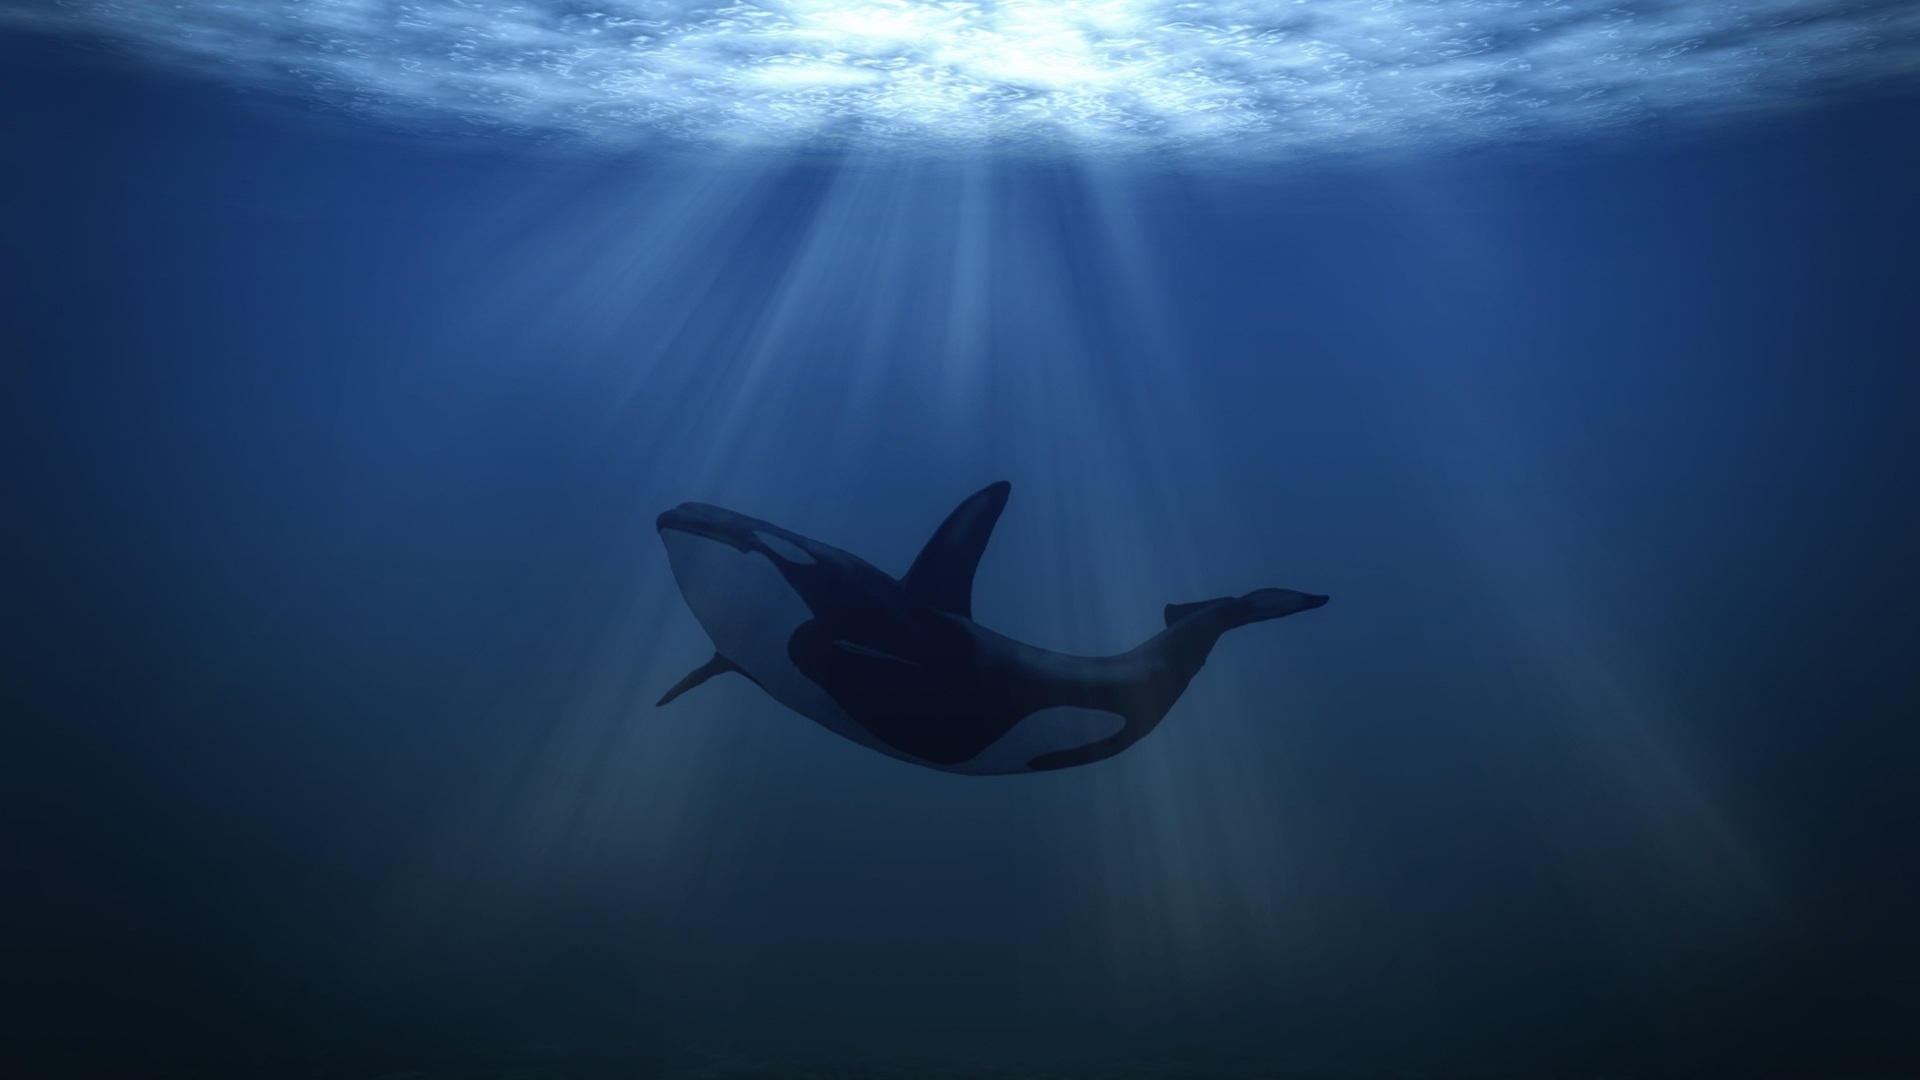 Big Whale Underwater for 1920 x 1080 HDTV 1080p resolution